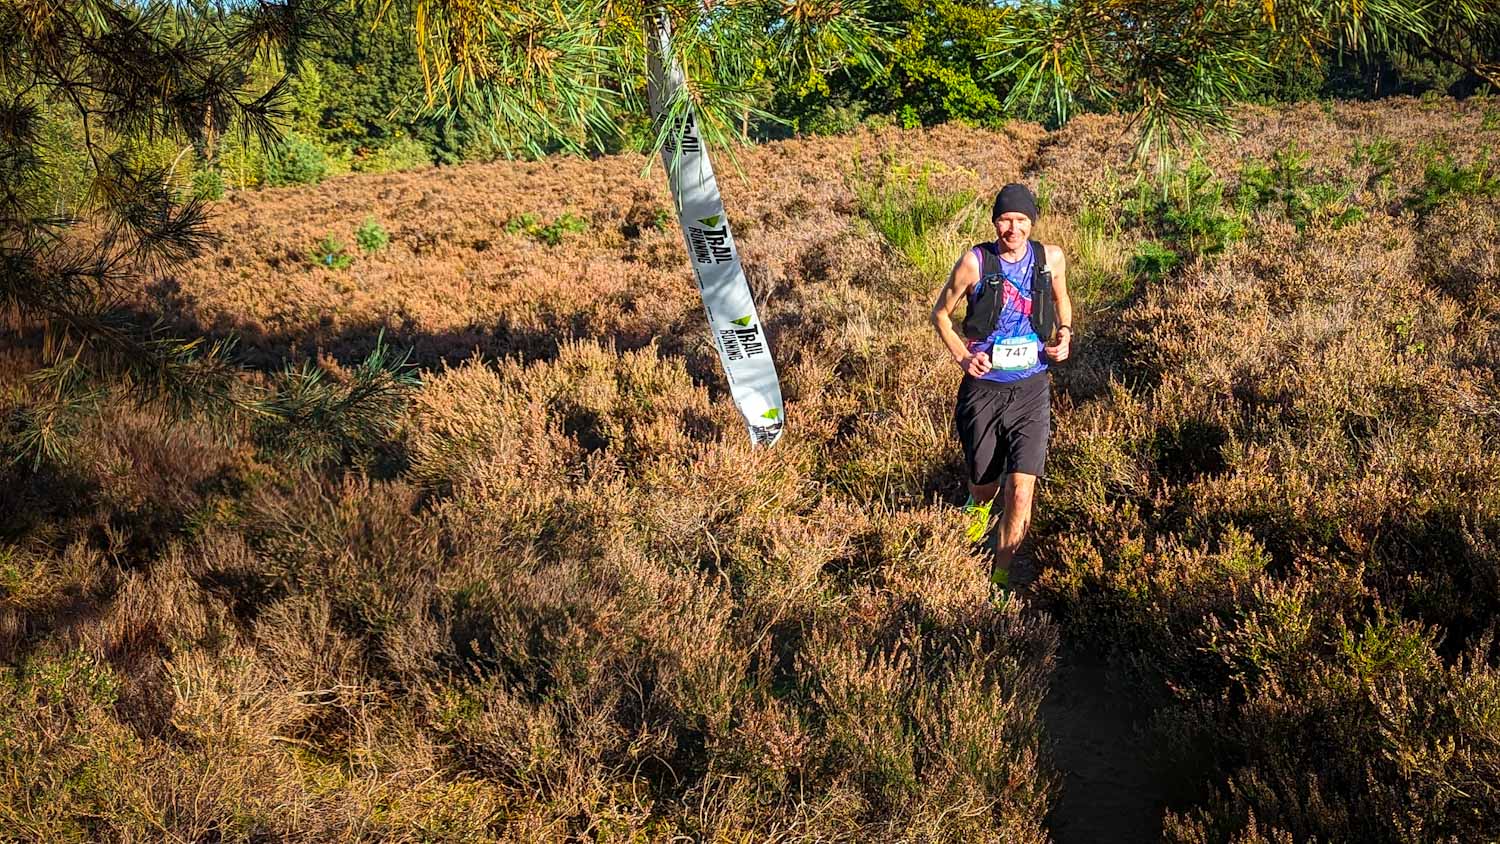 The Amerongse Berg Trail is the most beautiful trail running race in the Netherlands. A race report of the last summer edition.